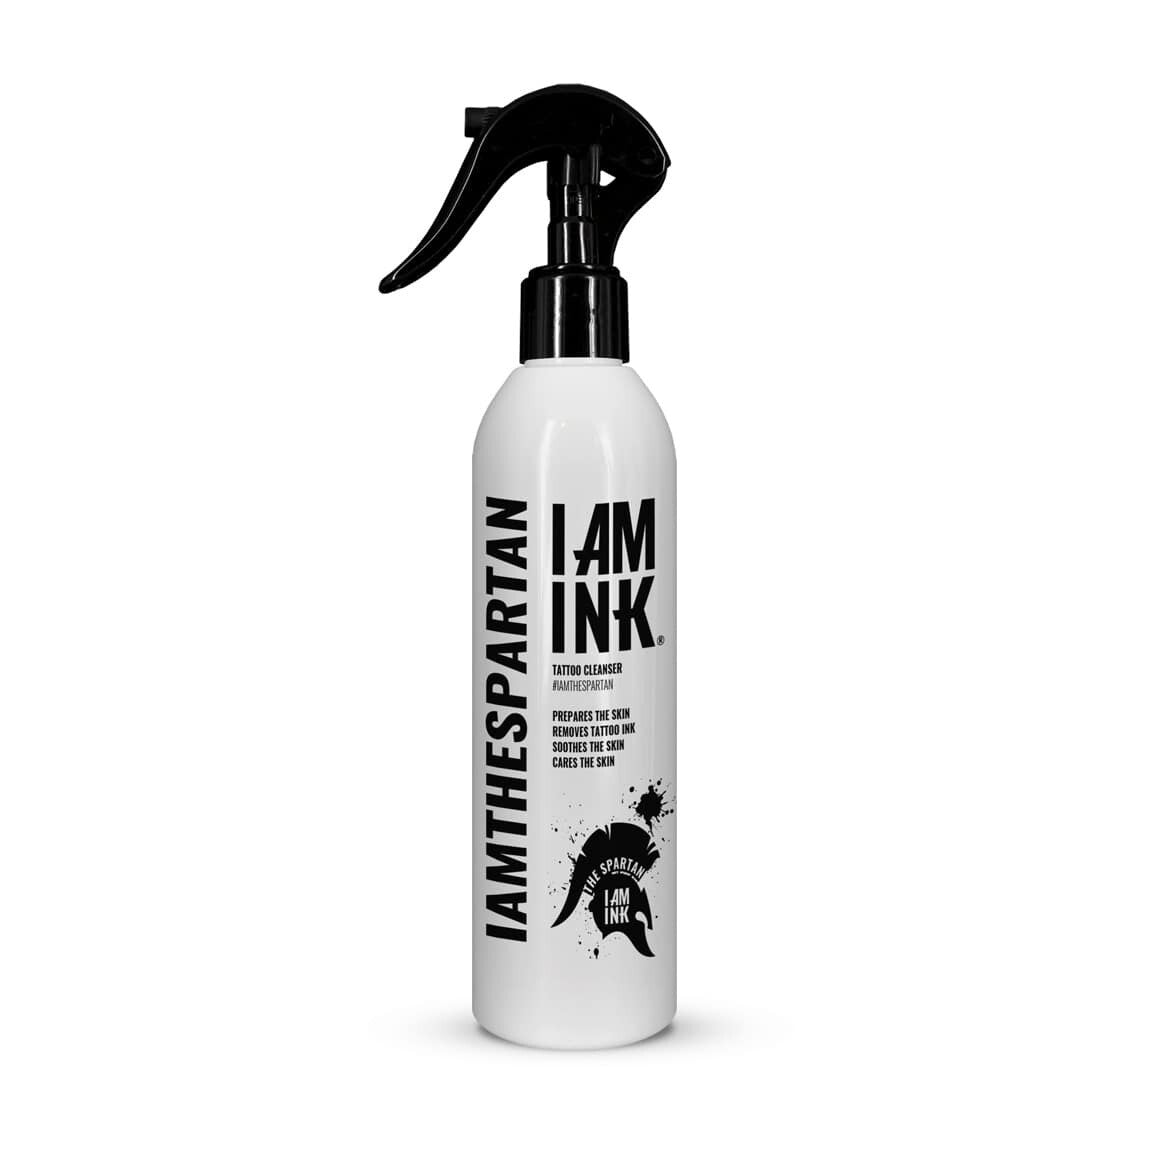 THE SPARTAN cleanser foam ready to use 250ml - mmtattoo supplies